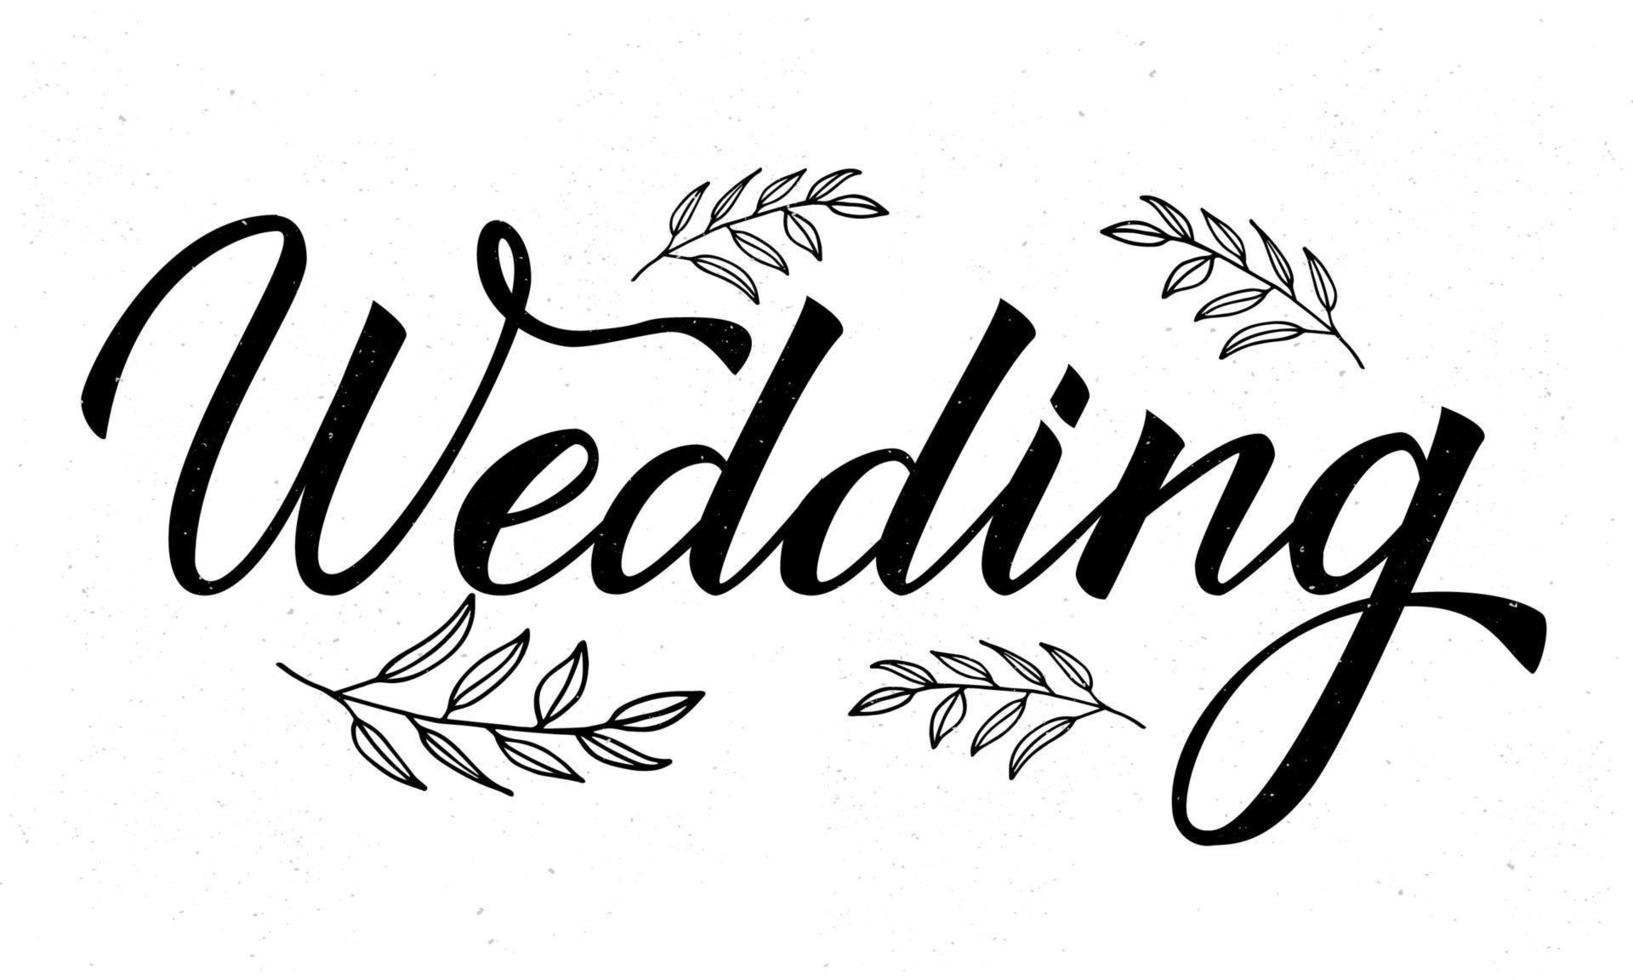 Hand drawn word Wedding with floral elements on white. Calligraphy lettering. Easy to edit vector template